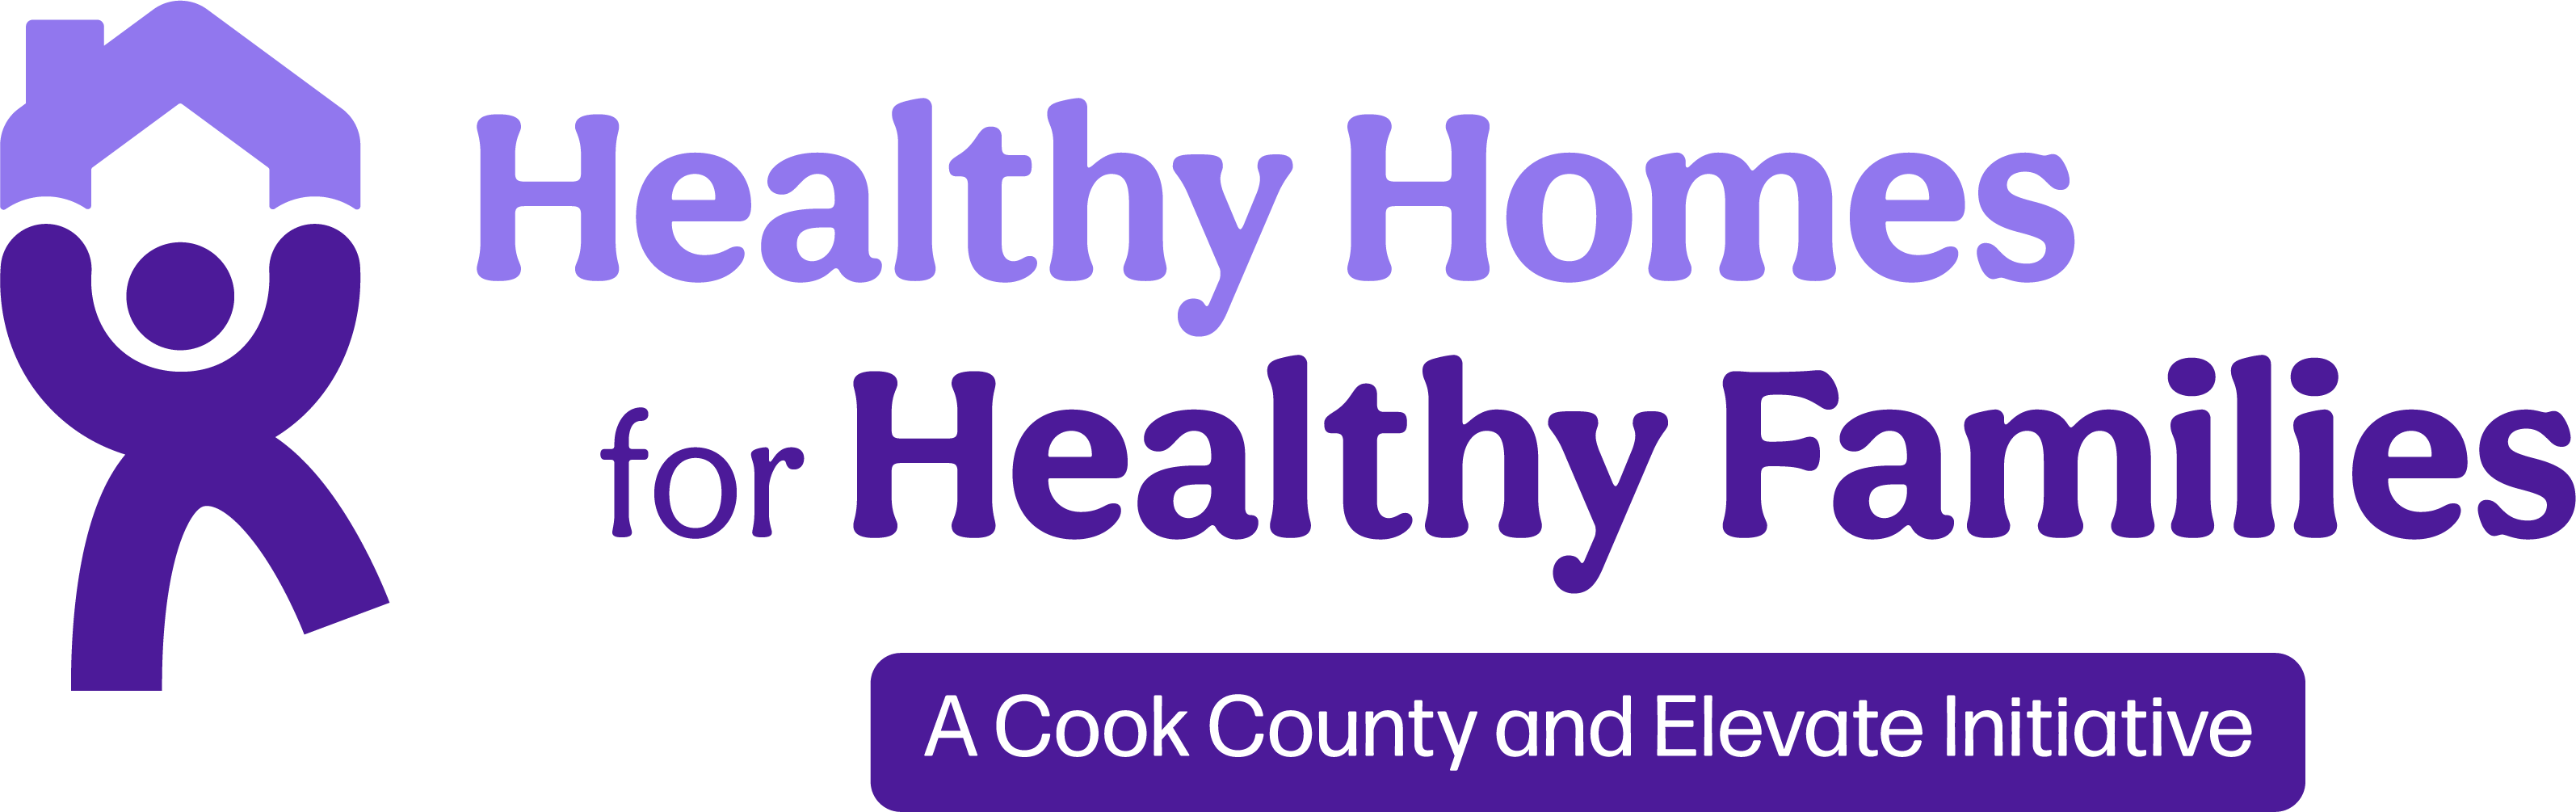 Homes for Healthy Families logo